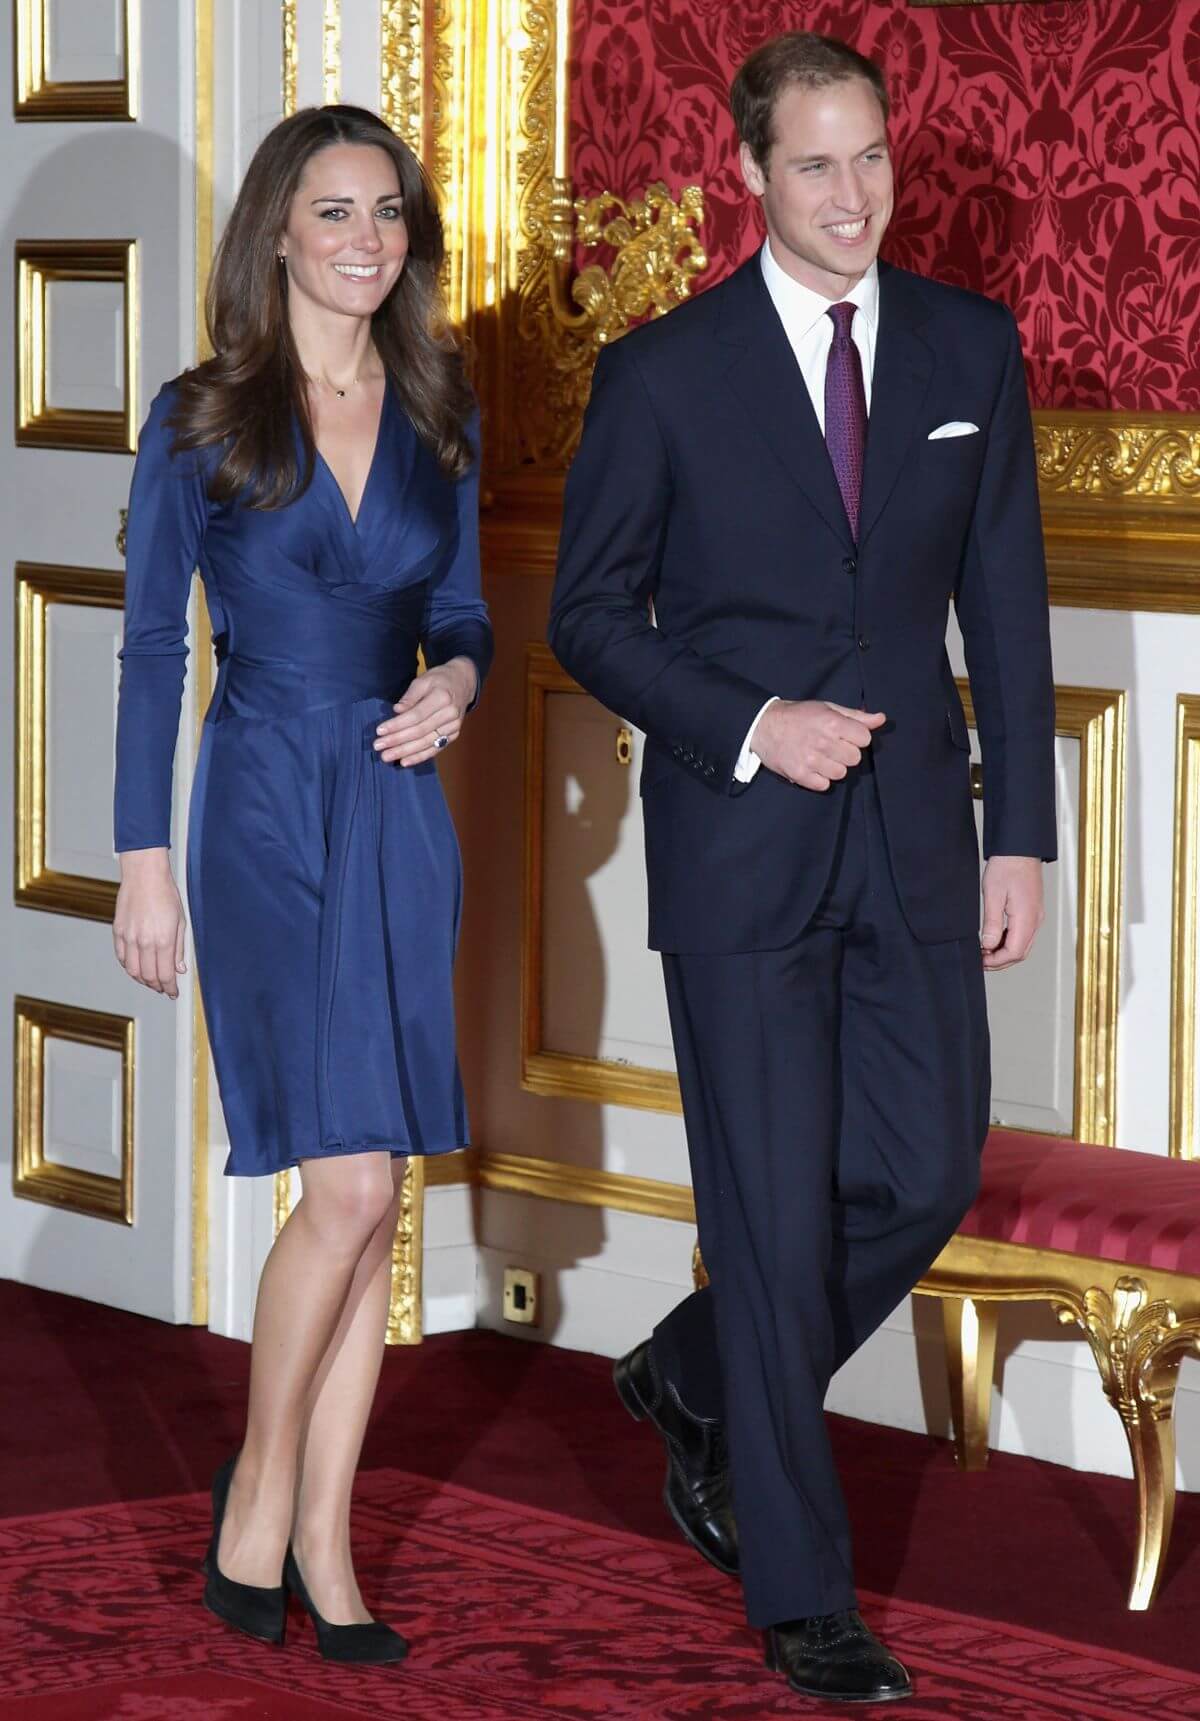 Prince William and Kate Middleton arrive to pose for photographs in St. James Palace after announcing engagement